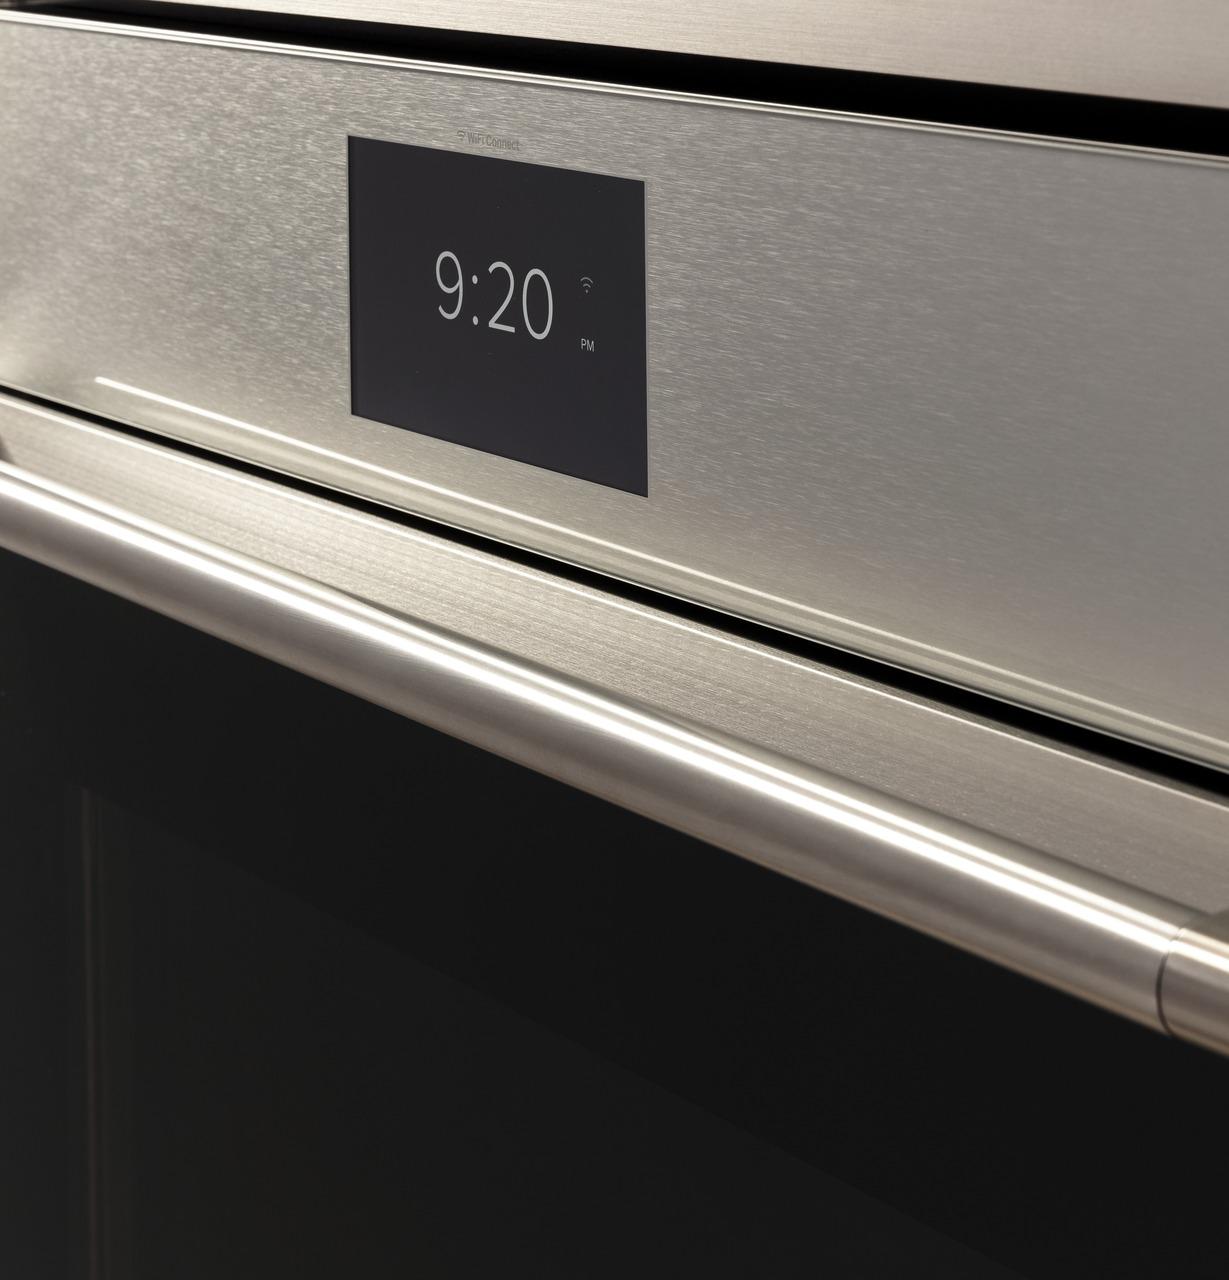 Cafe Caf(eback)™ 30" Smart Single Wall Oven with Convection in Platinum Glass